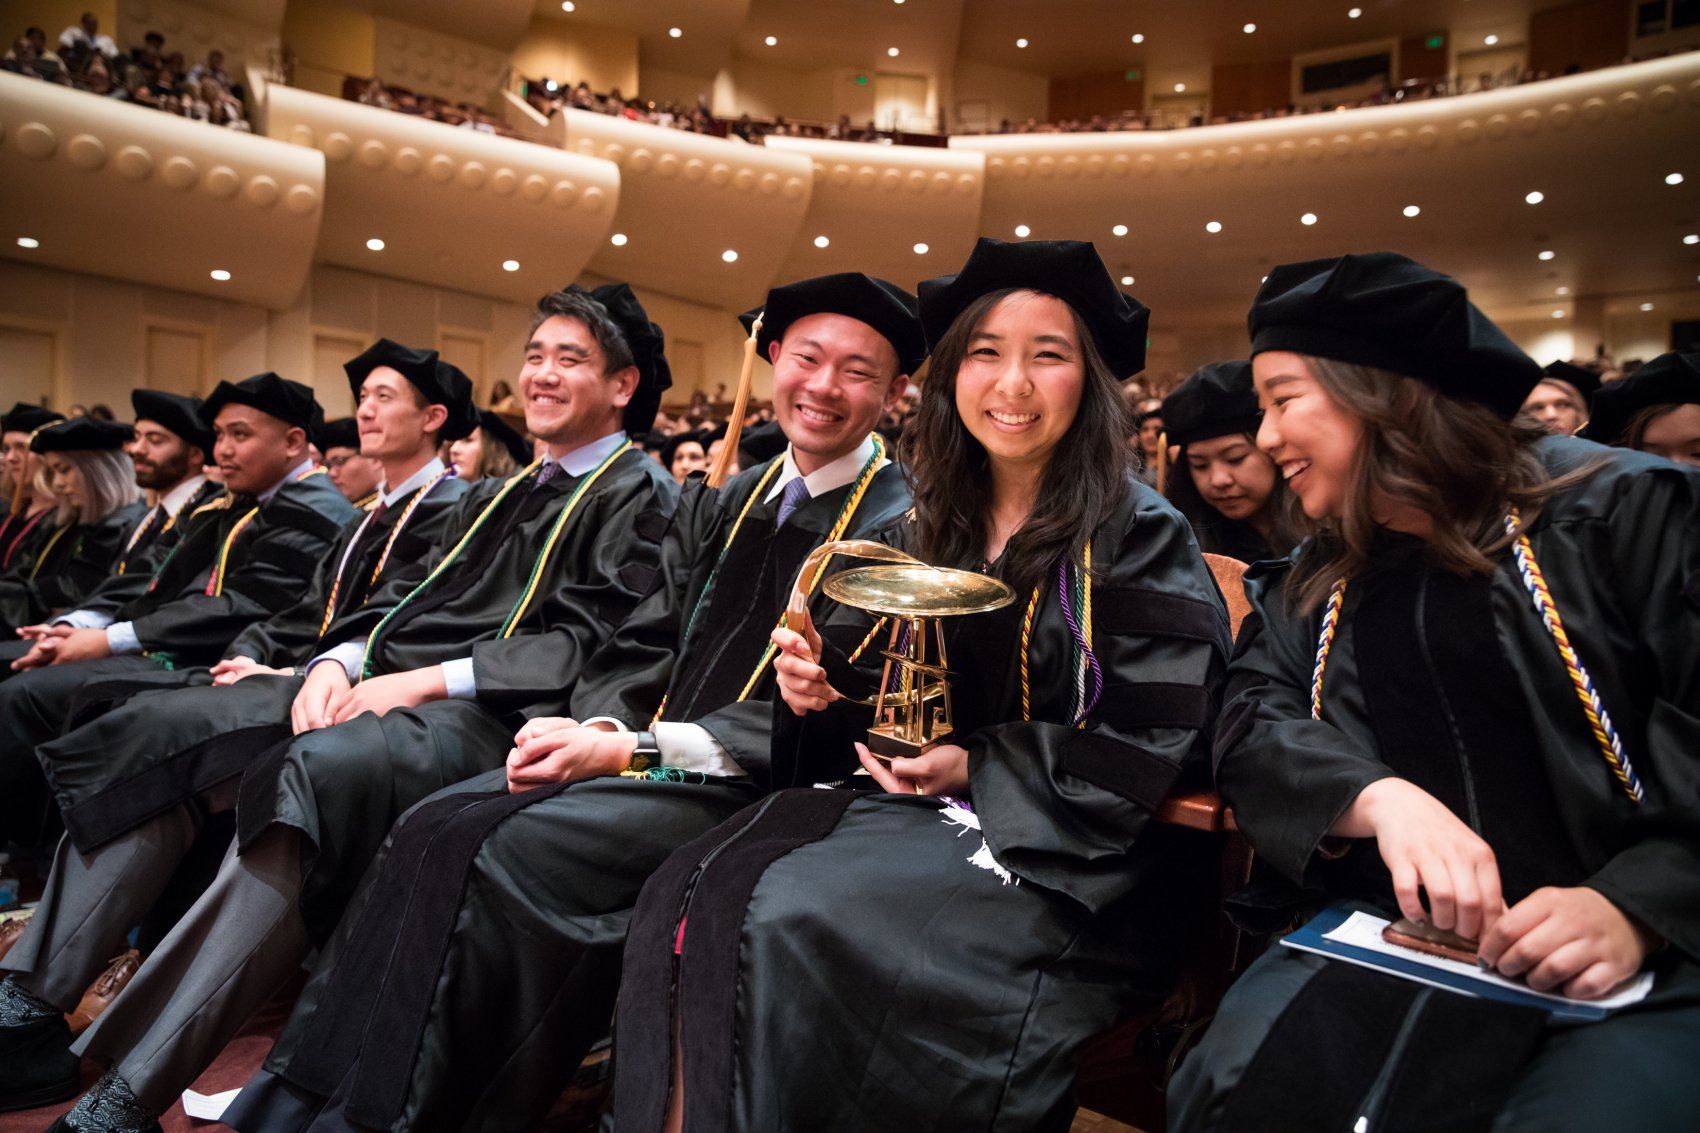 YeeAnn Chen holds the Bowl of Hygeia award at SOP Commencement 2019